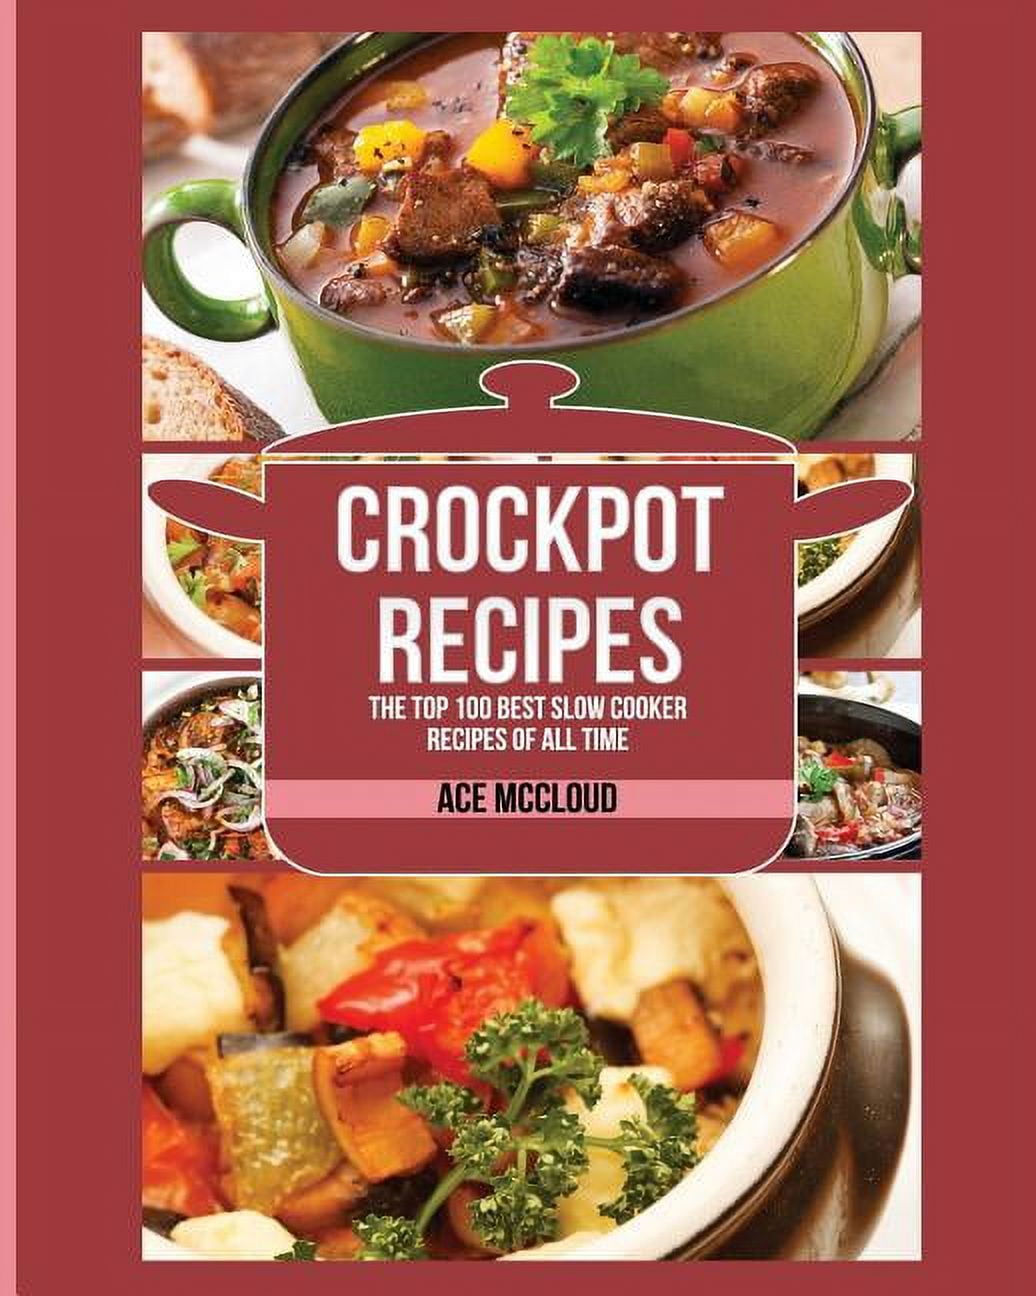 Crockpot Recipes: The Top 100 Best Slow Cooker Recipes Of All Time [Book]